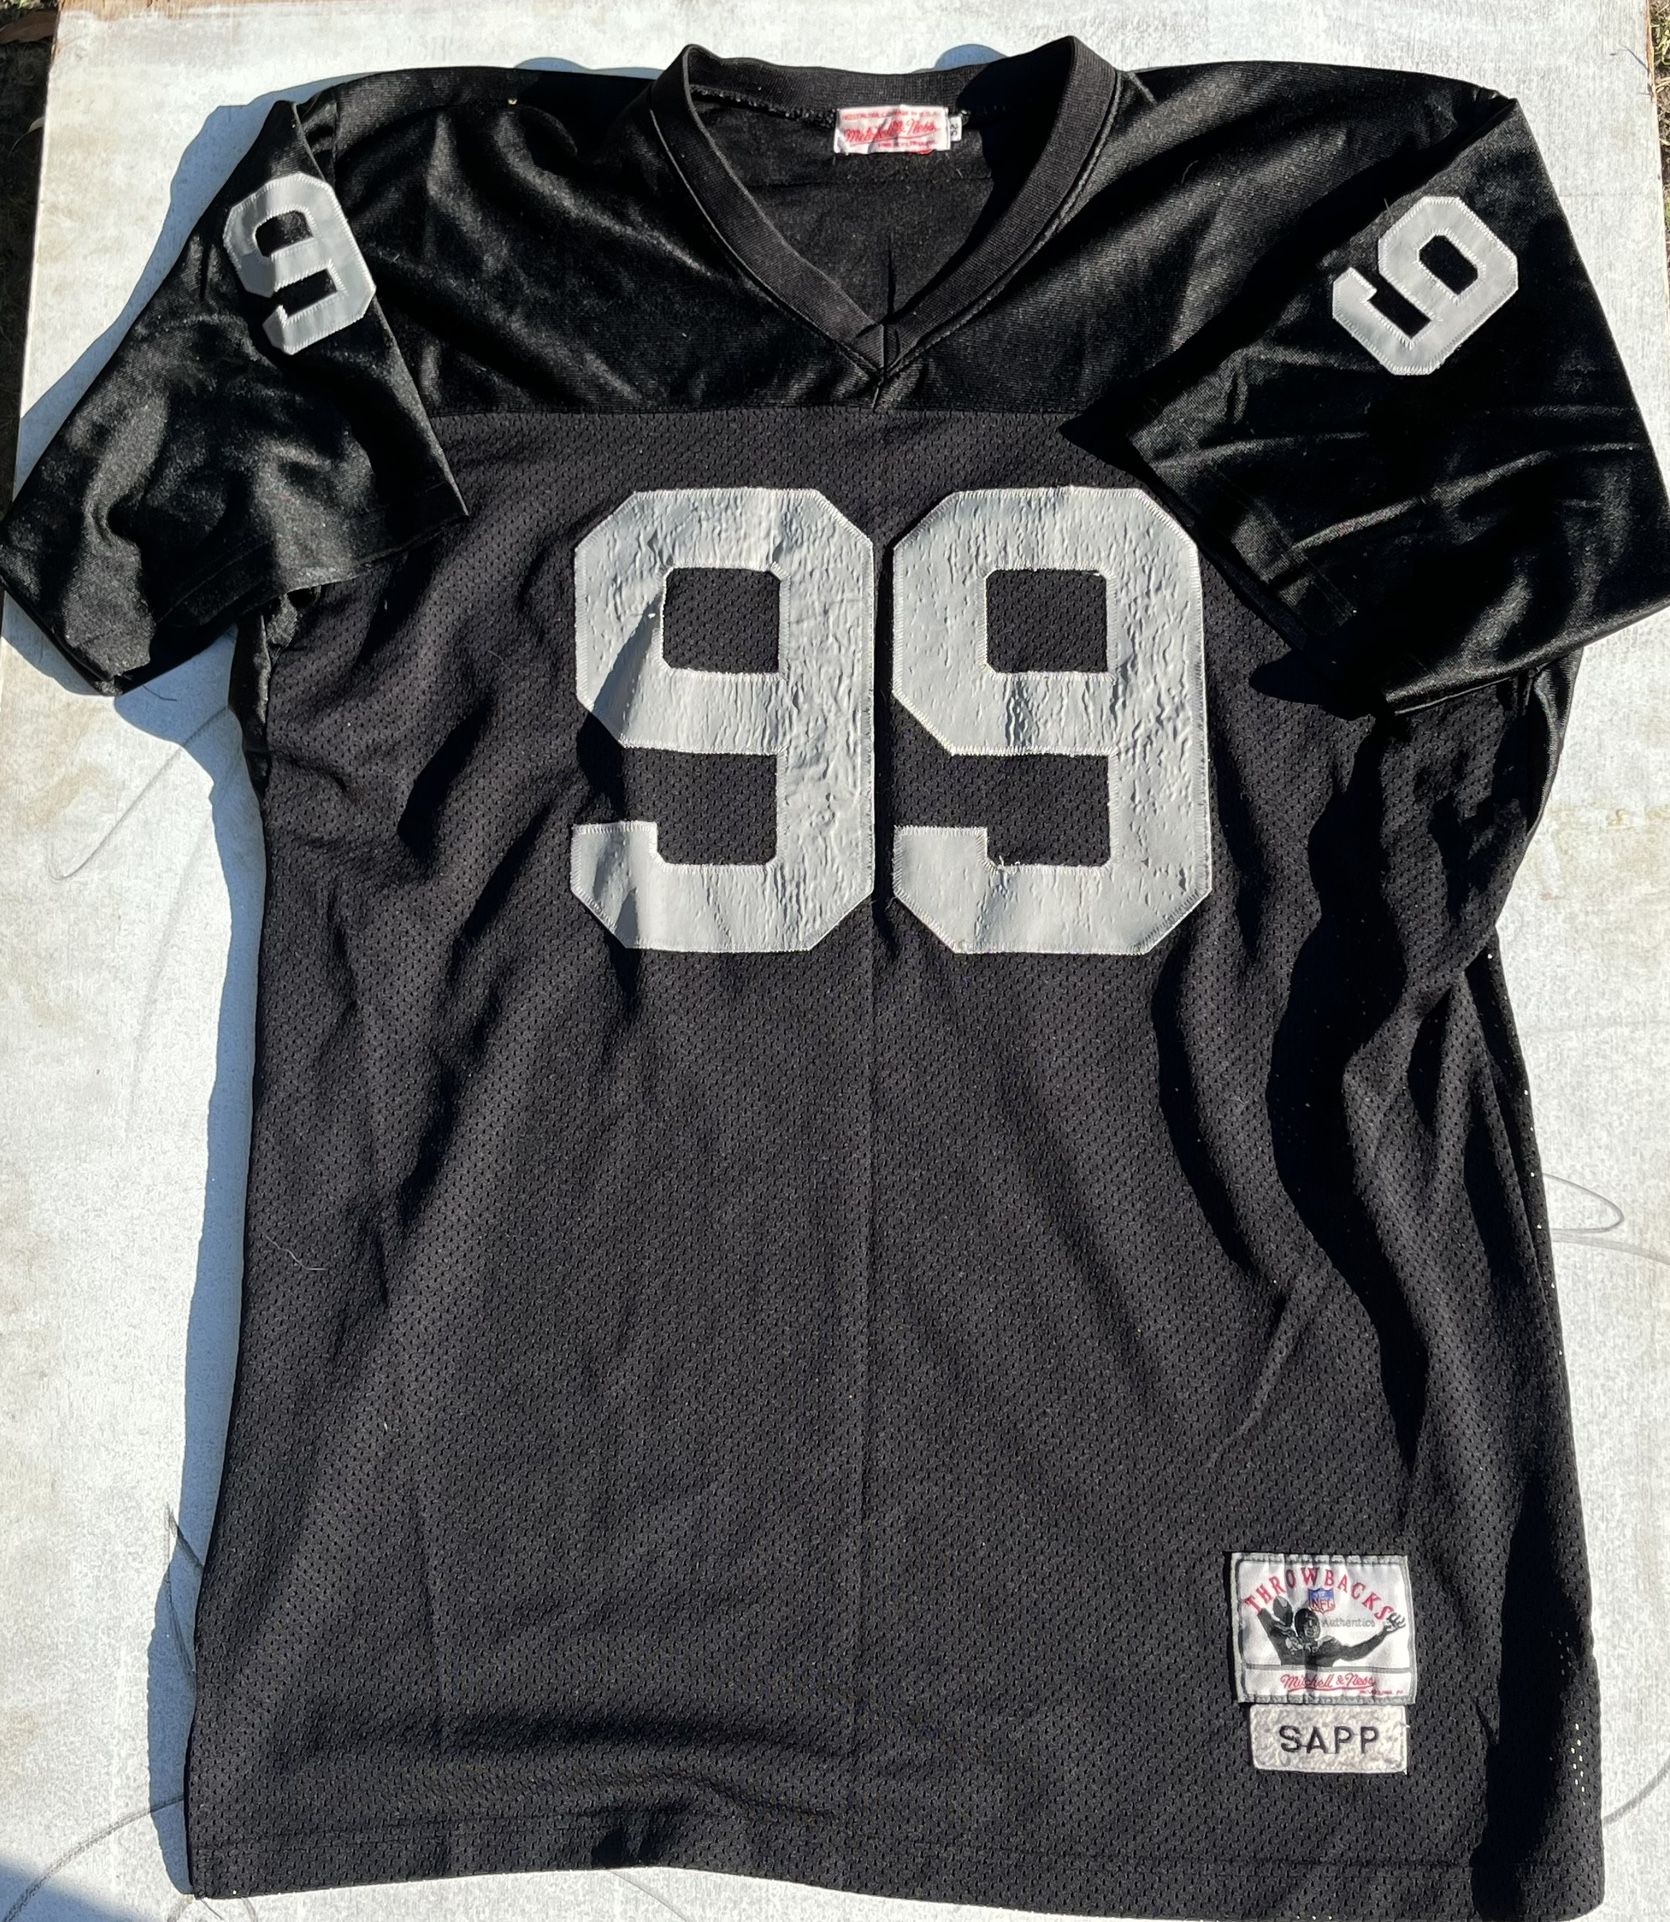 Oakland Raiders Throwback NFL Jersey for Sale in Stockton, CA